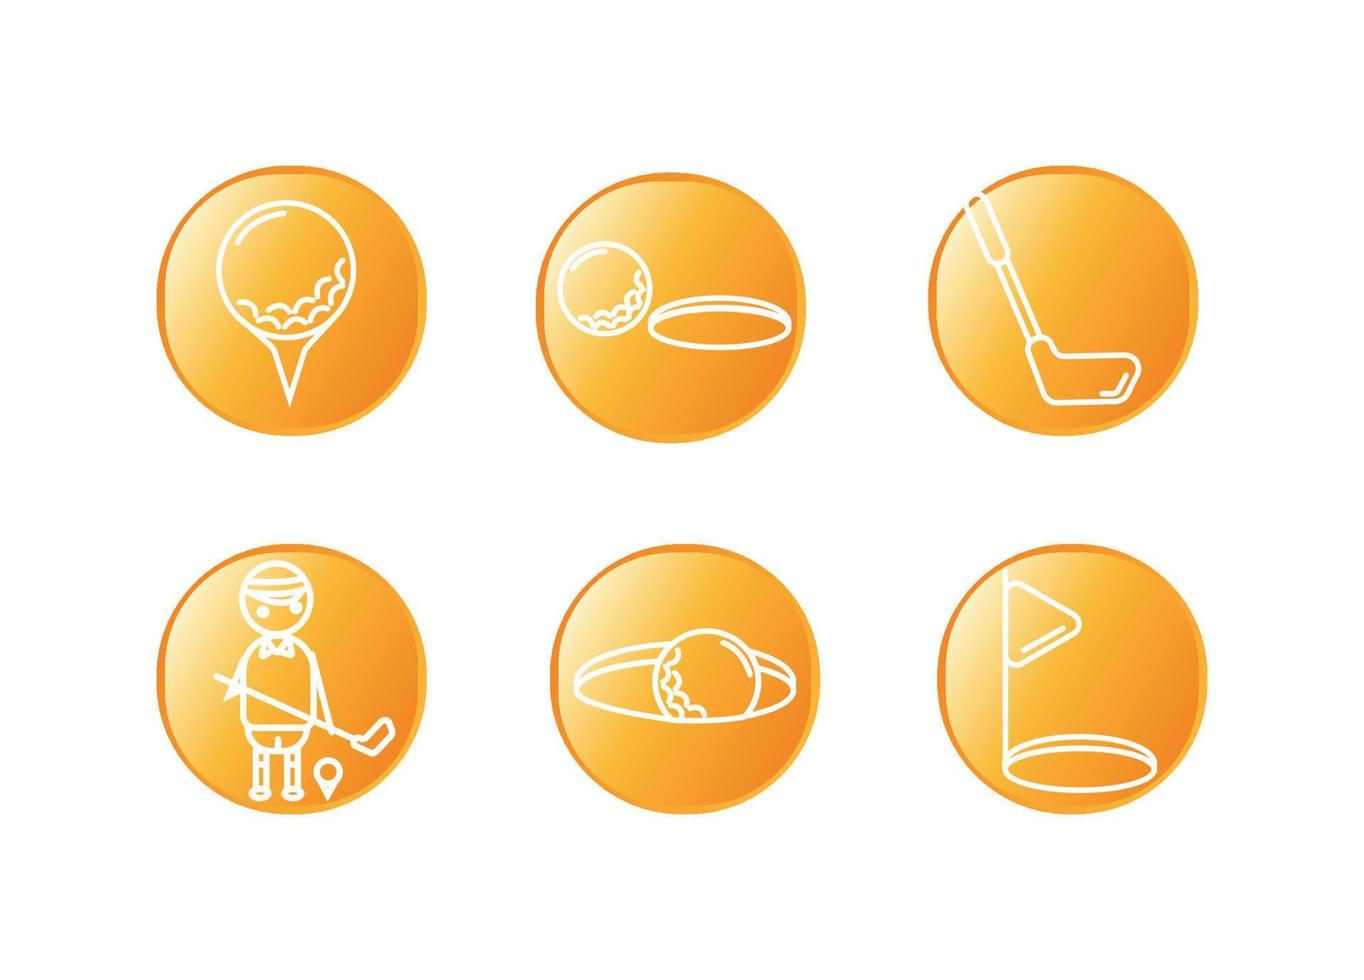 Golf icon set on an orange background. Ball on a golf stand. A golfer with a stick near the golf ball on a stand. Golf ball in the hole. Flagstaff near the hole vector